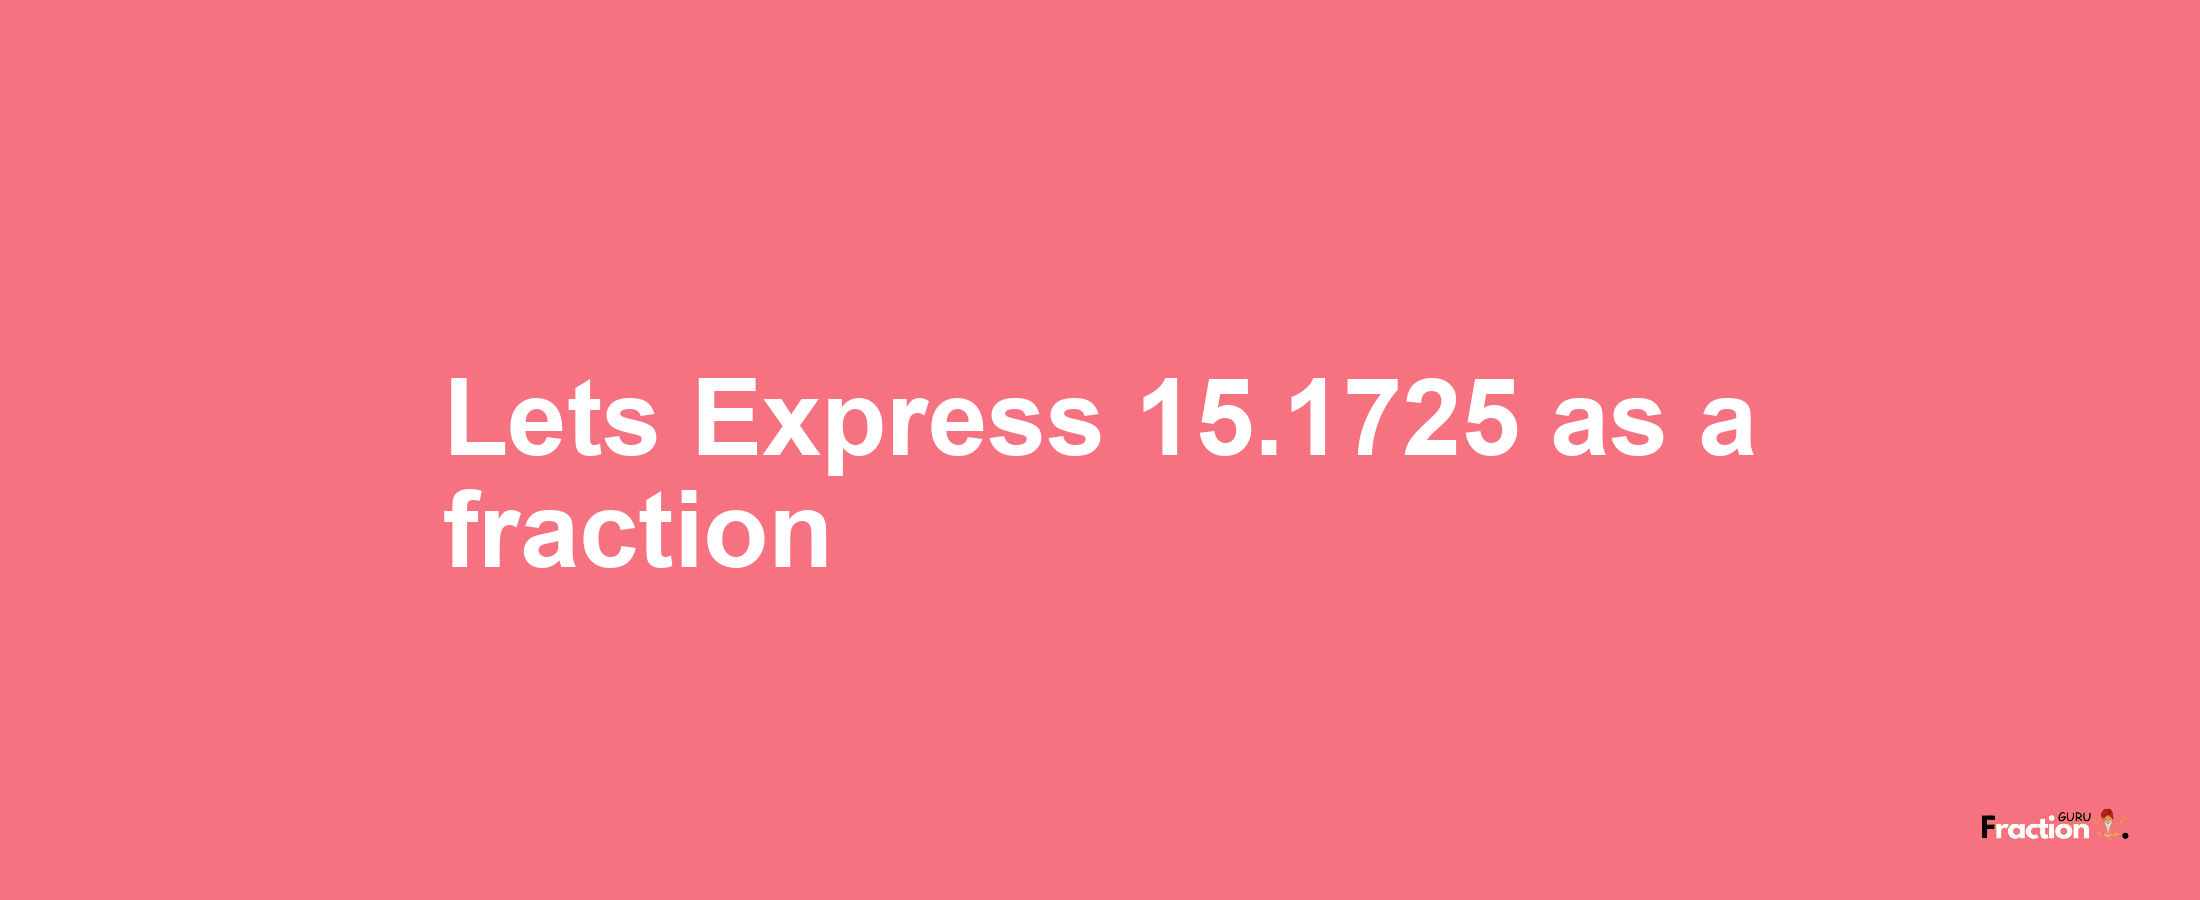 Lets Express 15.1725 as afraction